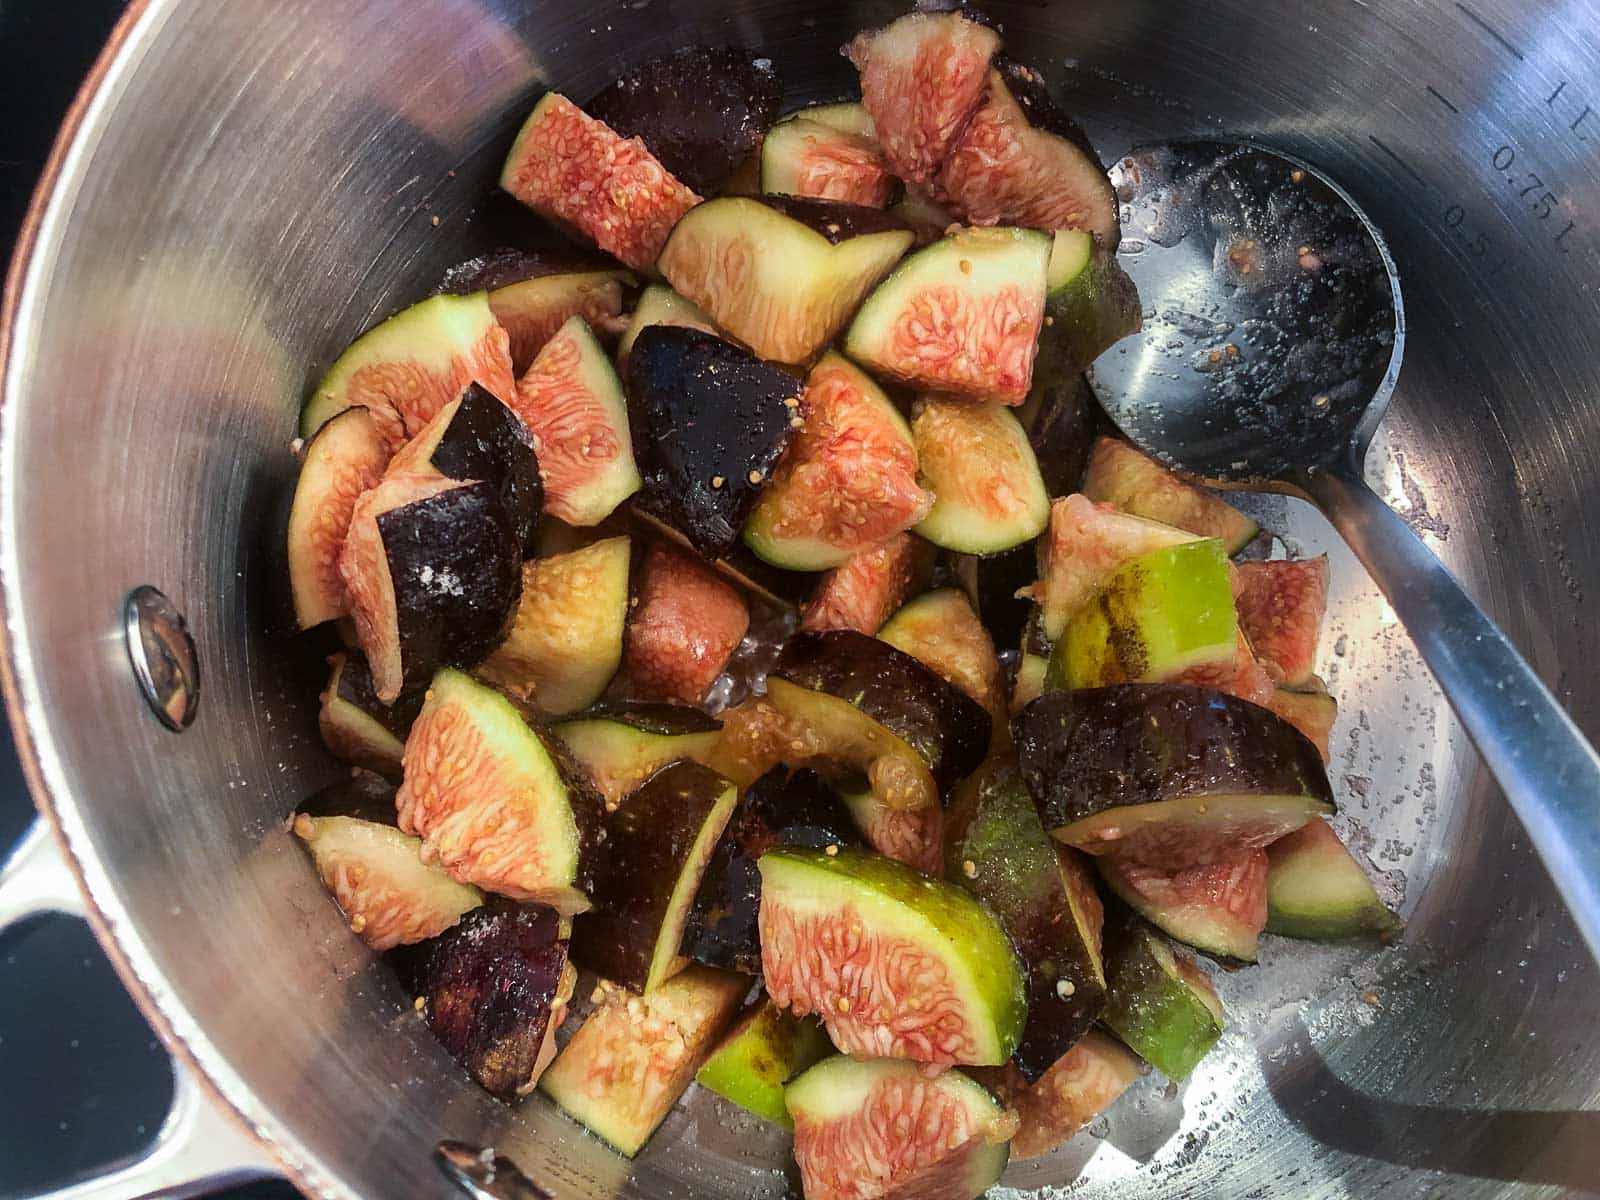 figs diced in a pan to make a fig compote.